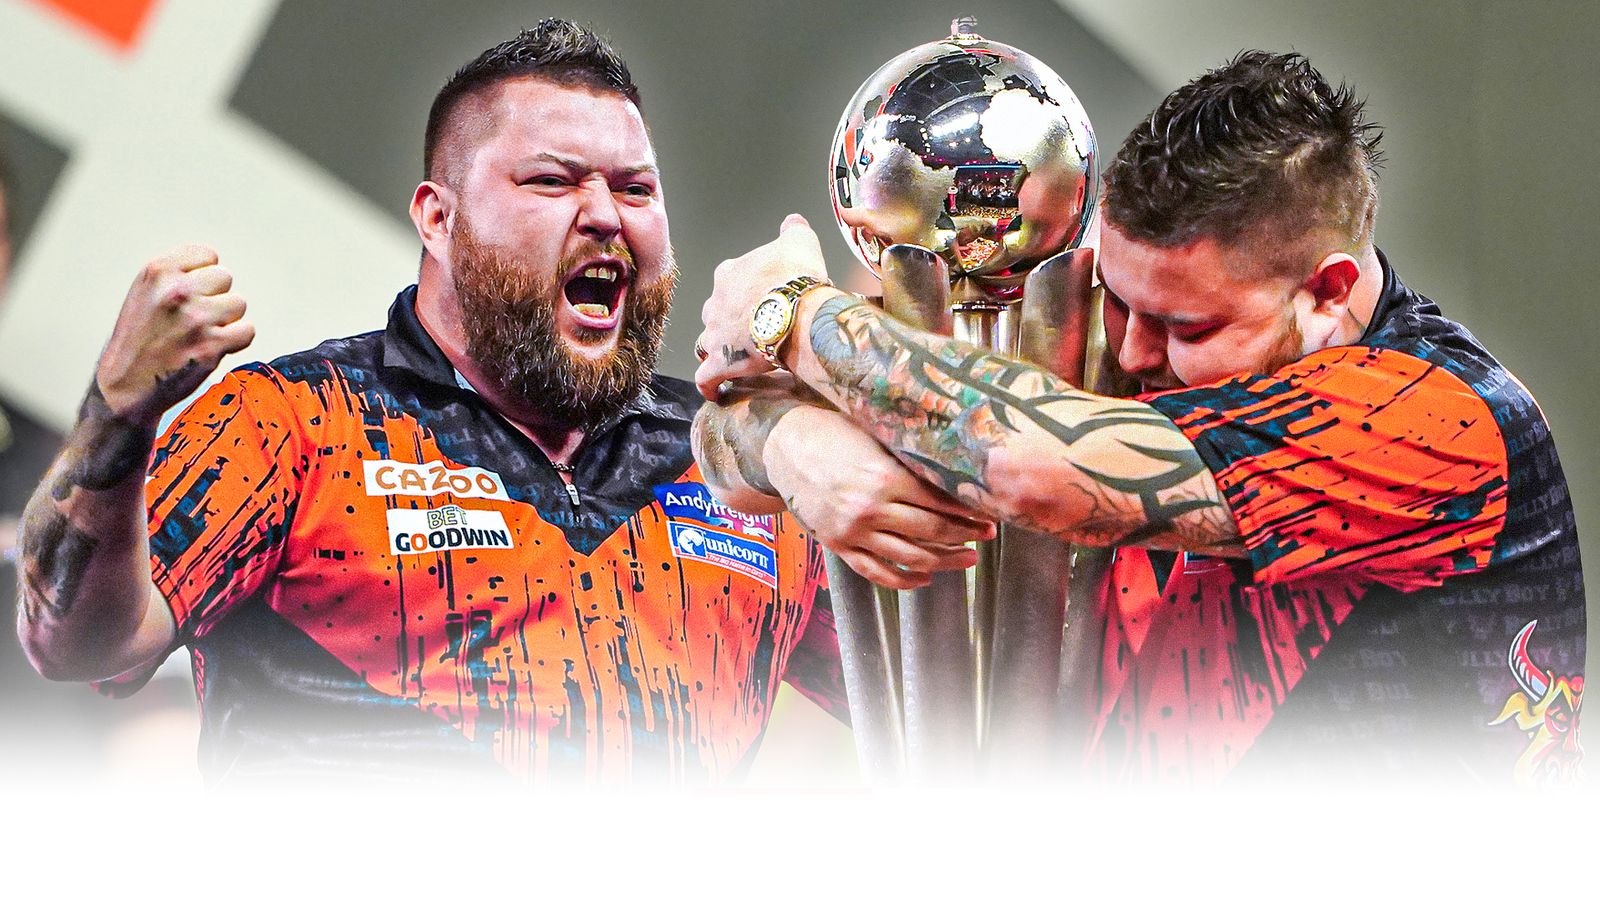 Michael Smith The new world darts champion on fulfilling his darting